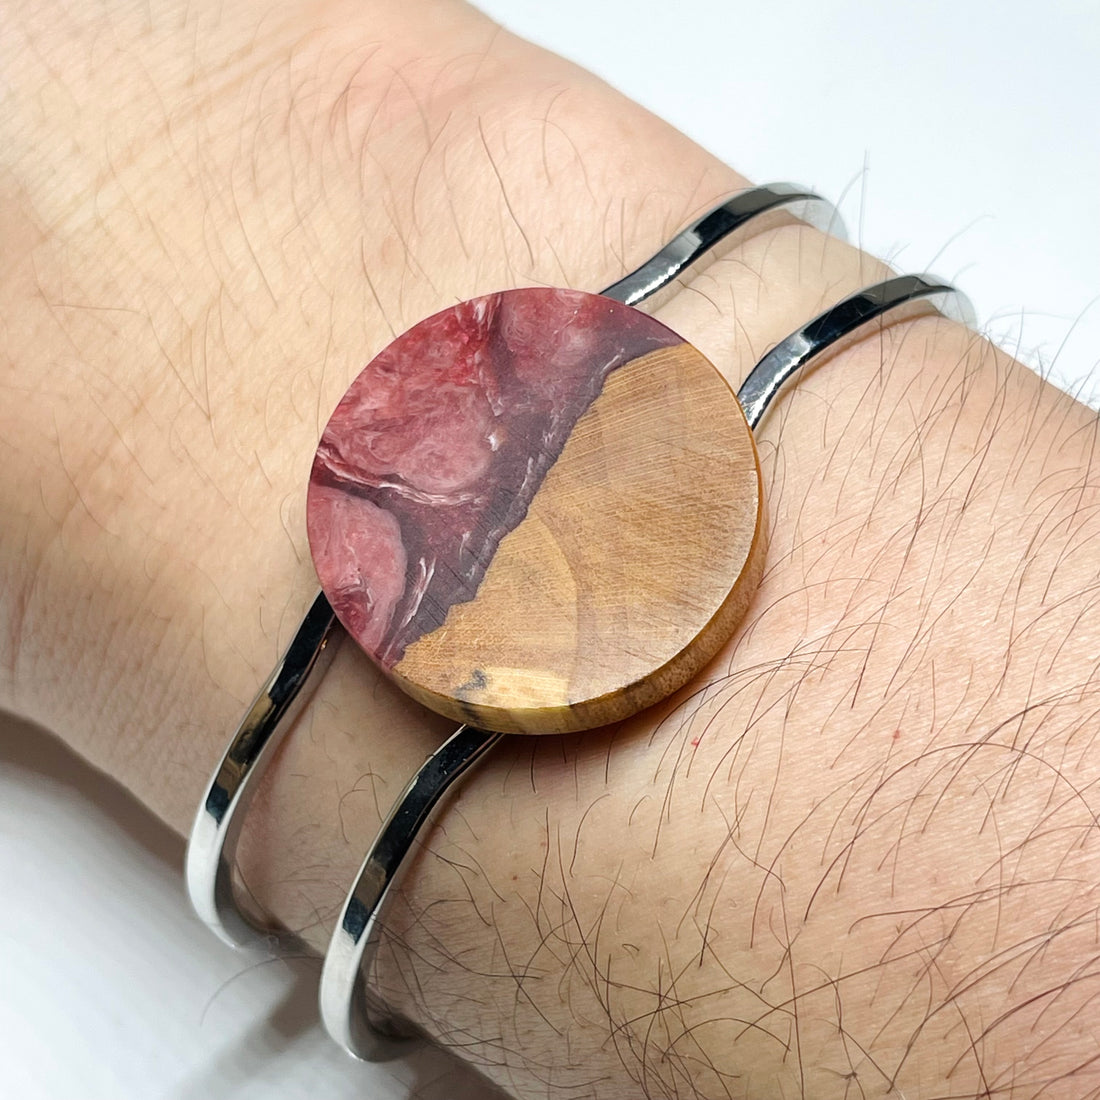 handmade jewelry, Minnesota local wood and resin artist. Deep red and white swirled  resin with maple wood, platinum plated bracelet